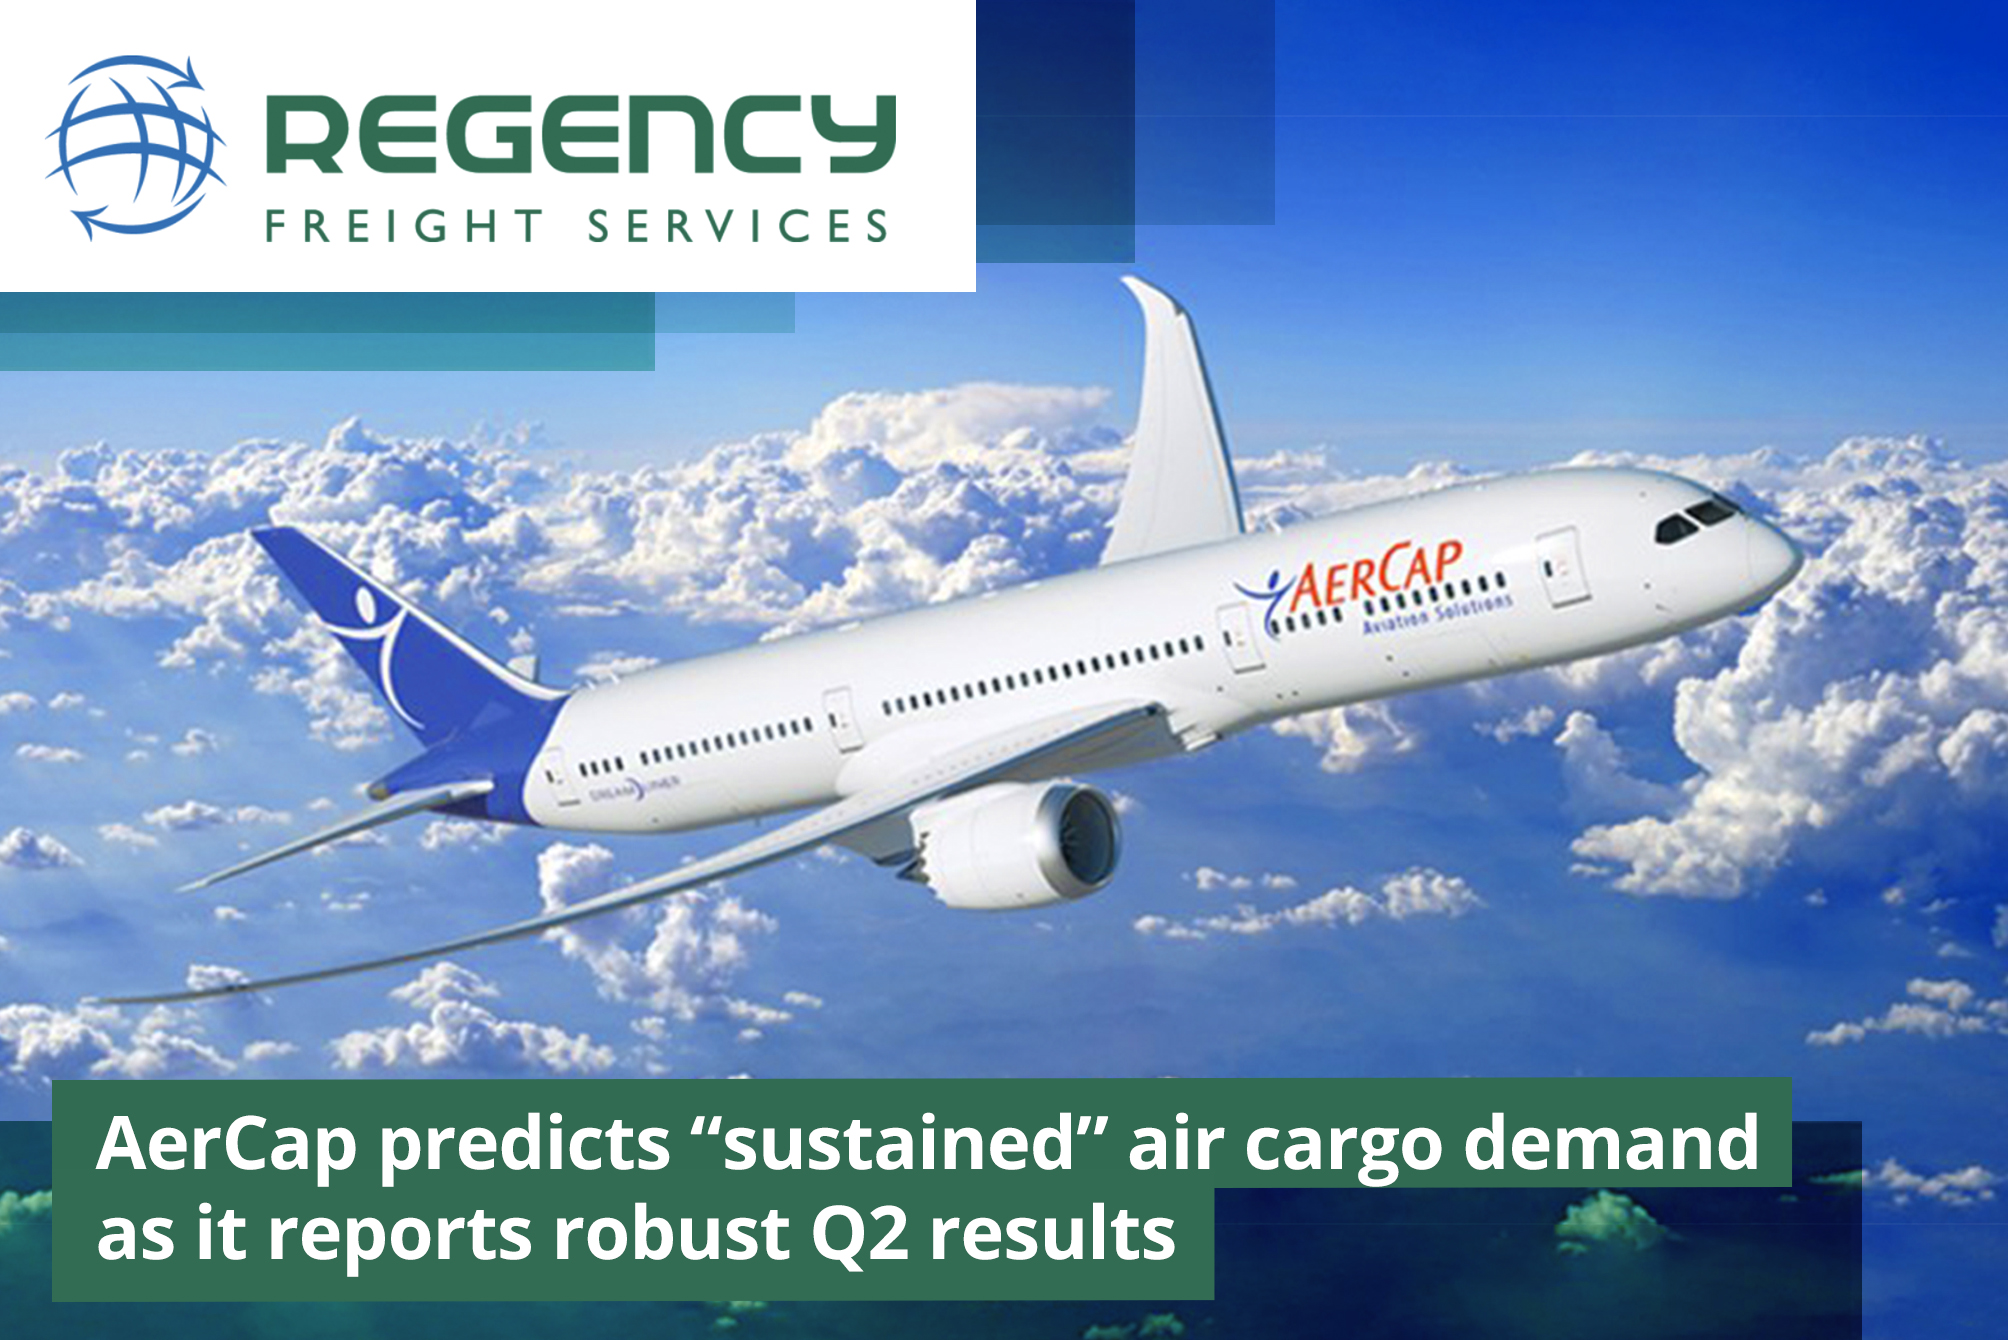 World’s largest ocean freight carrier launches air cargo business